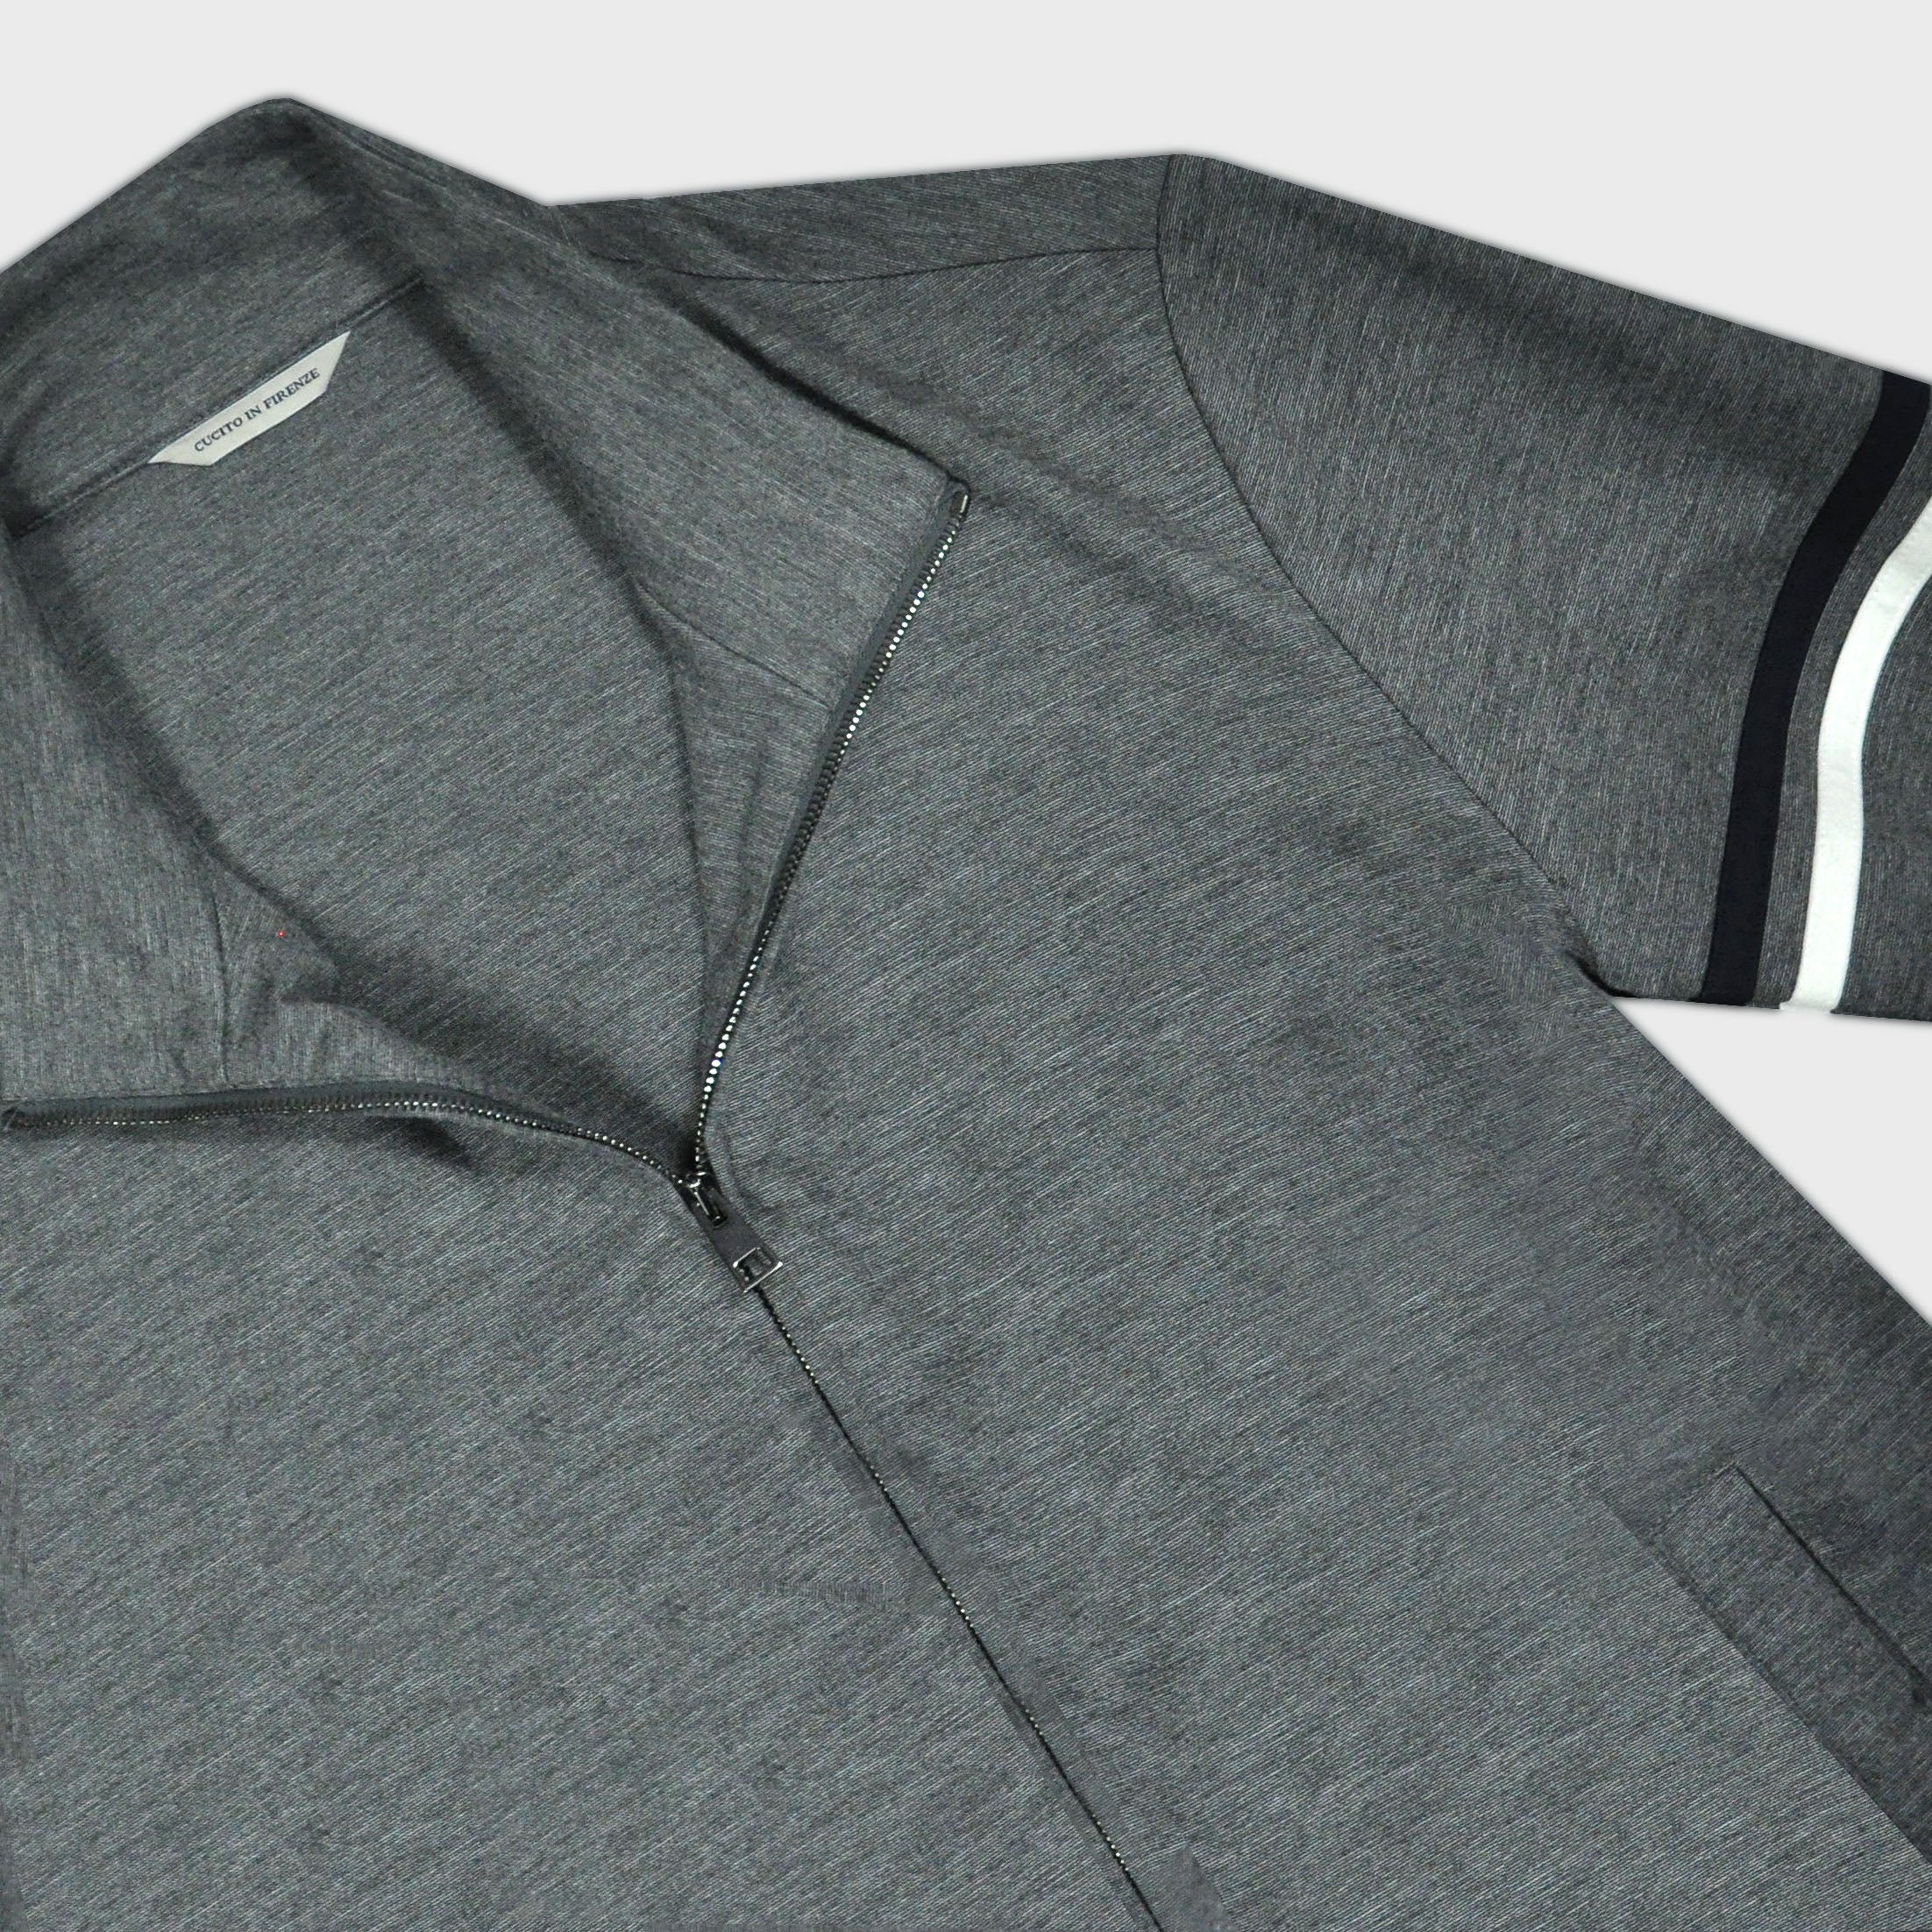 Jersey Zip in Grey with Arm Stripes